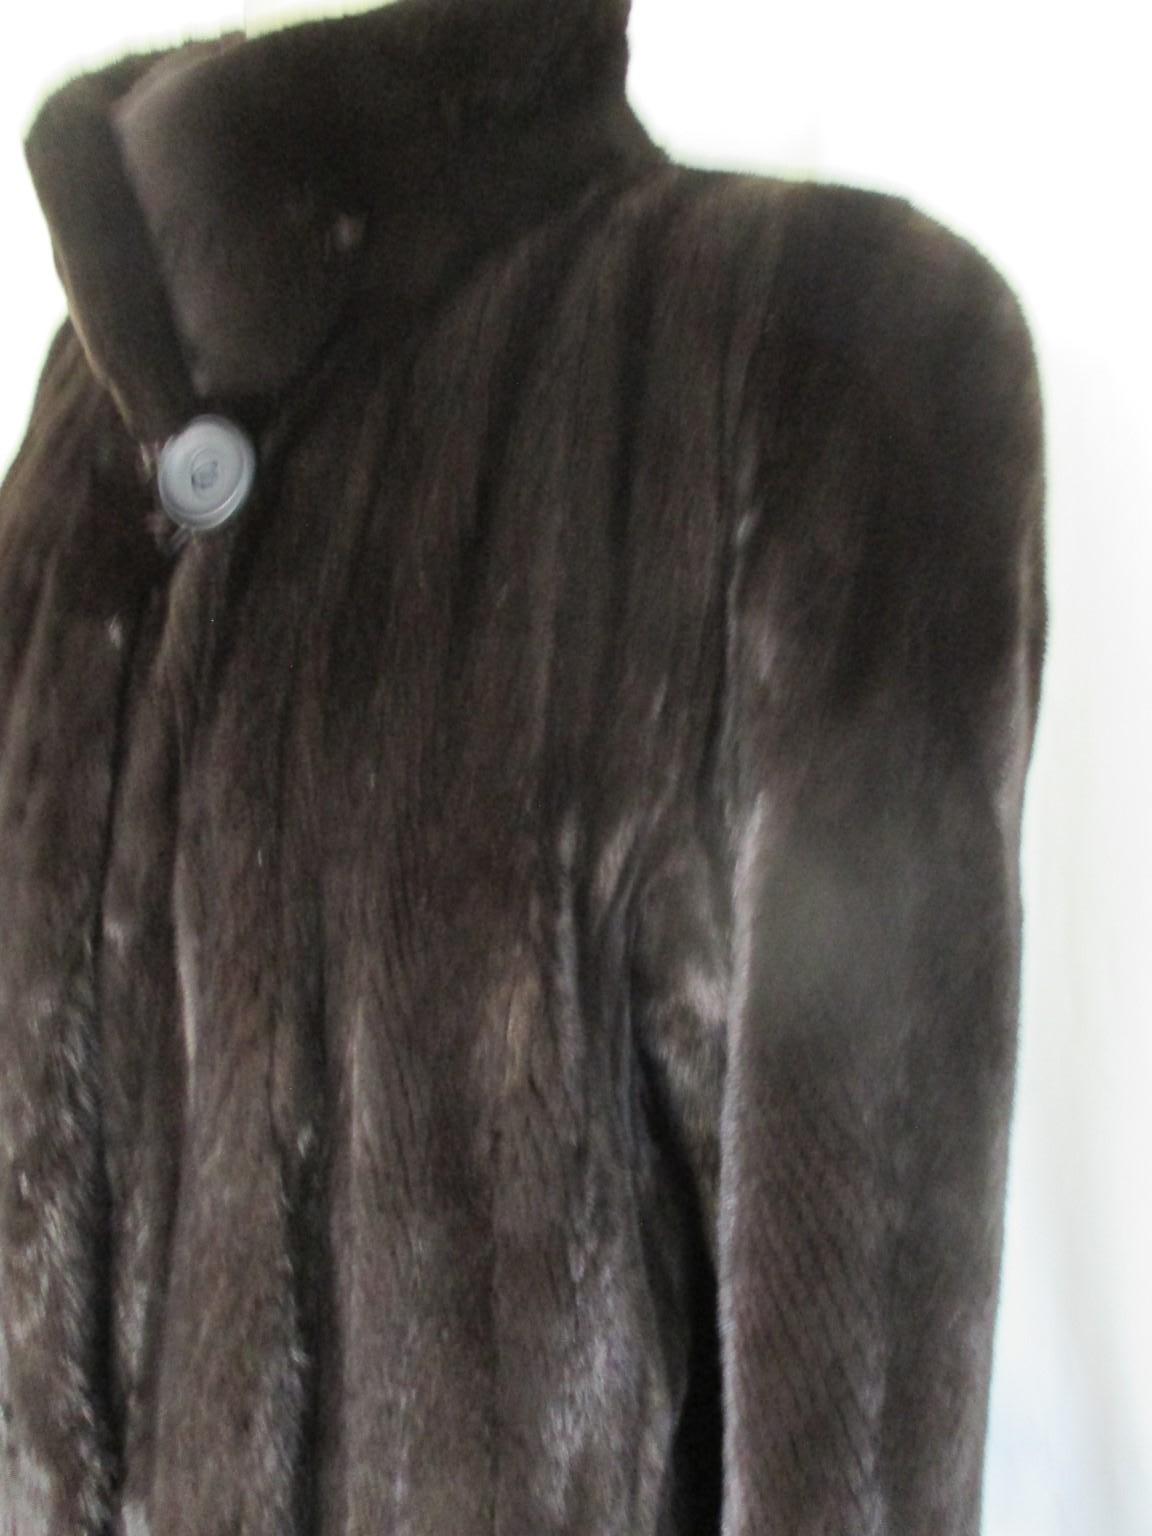 This brown coat is made of soft quality sheared mink fur.

We offer more luxury fur items, view our front store

Details:
Very soft and light weight, high quality mink
with 1 closing button, 3 closing hooks, 
2 pockets 
These coats are rare to